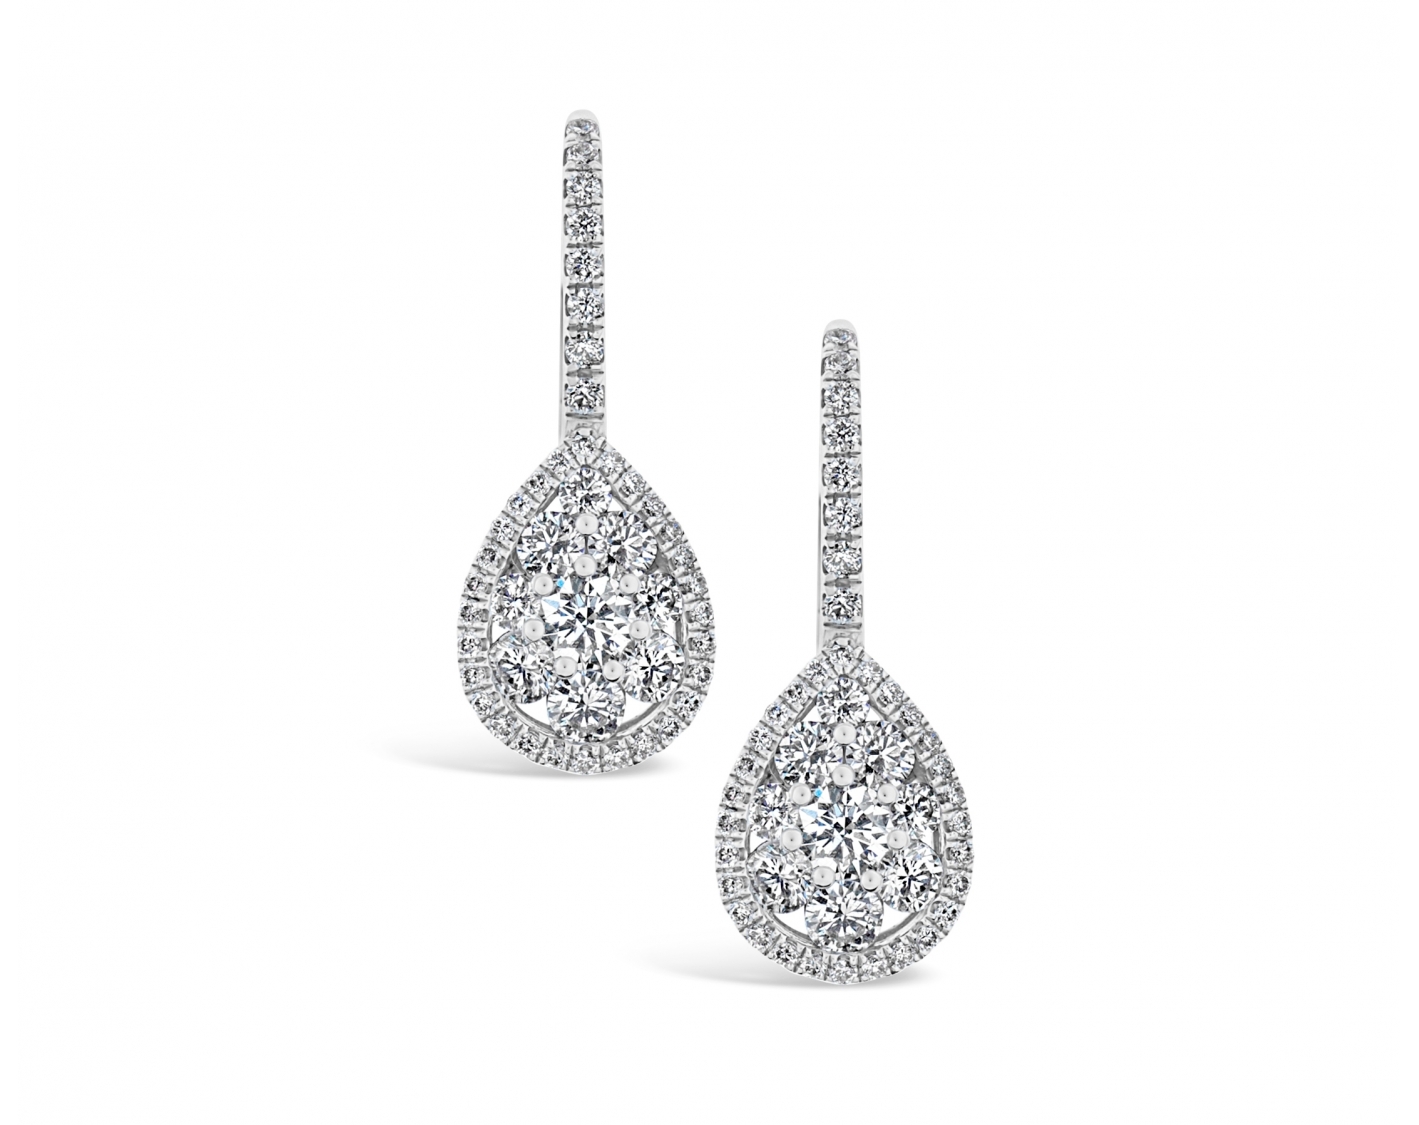 18k rose gold pear shaped illusion set diamond earrings with round upstones Photos & images